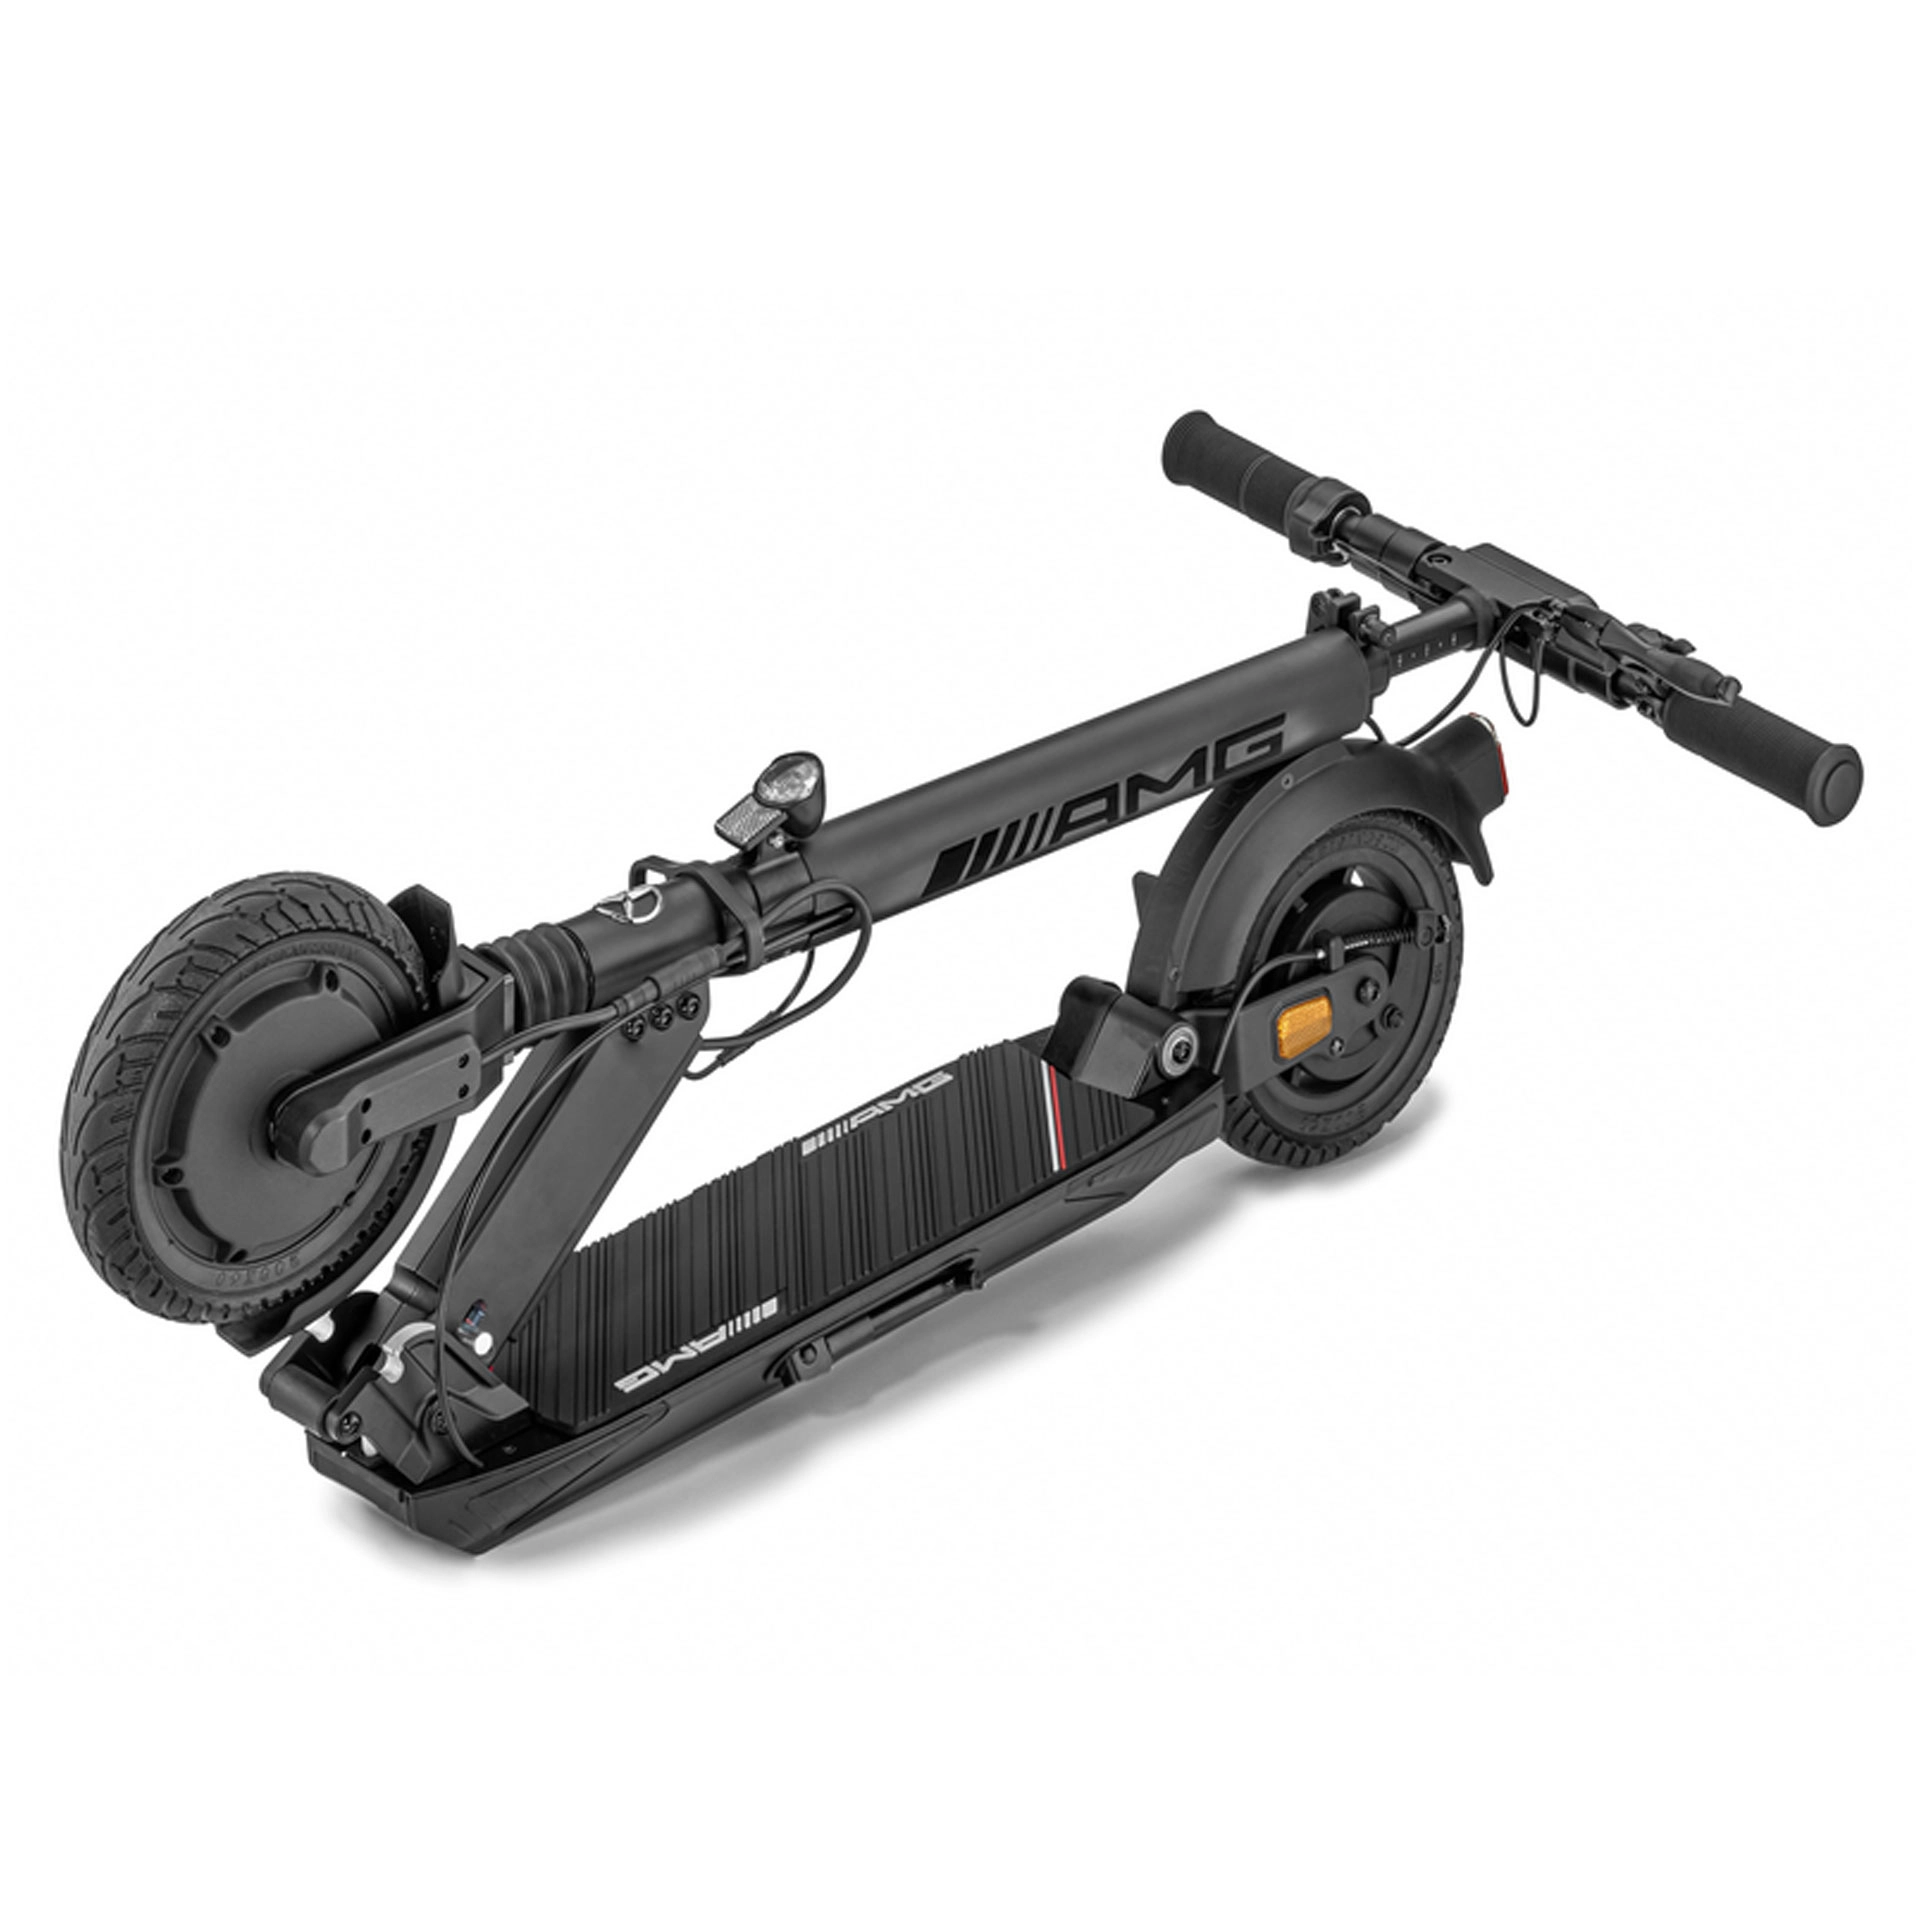 B66959592_mercedes-amg_e-scooter_rosier-onlineshop2